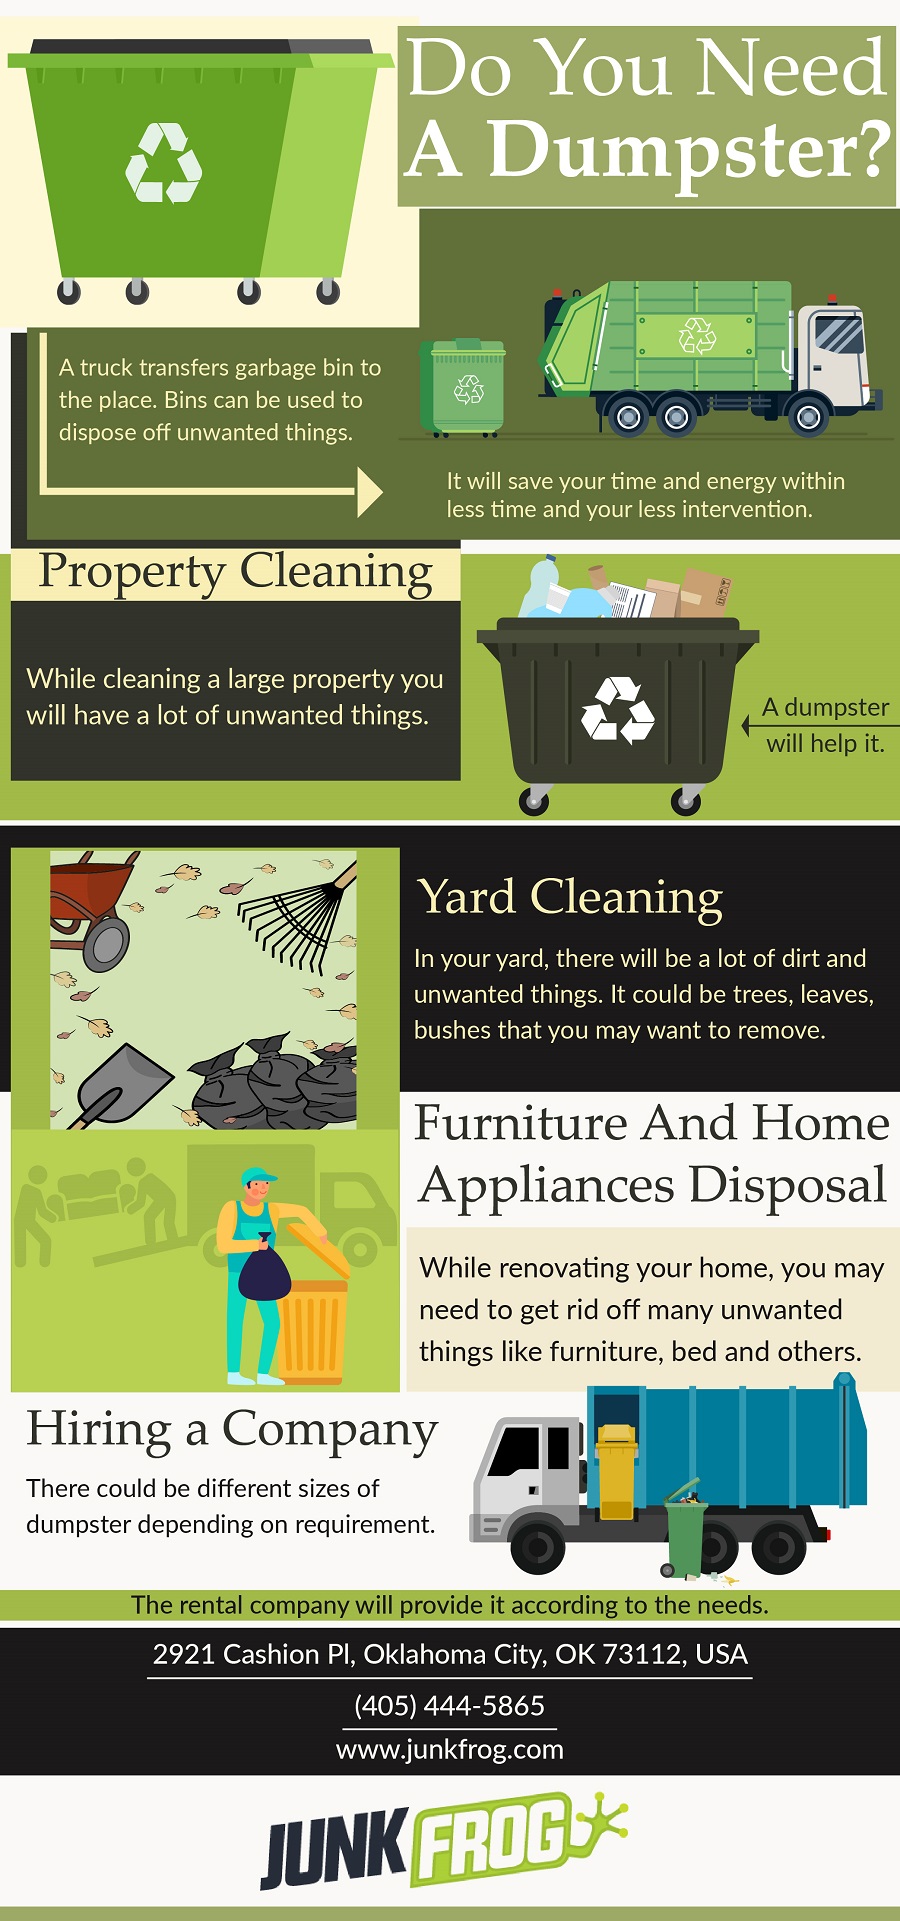 do you need a dumpster? infographic